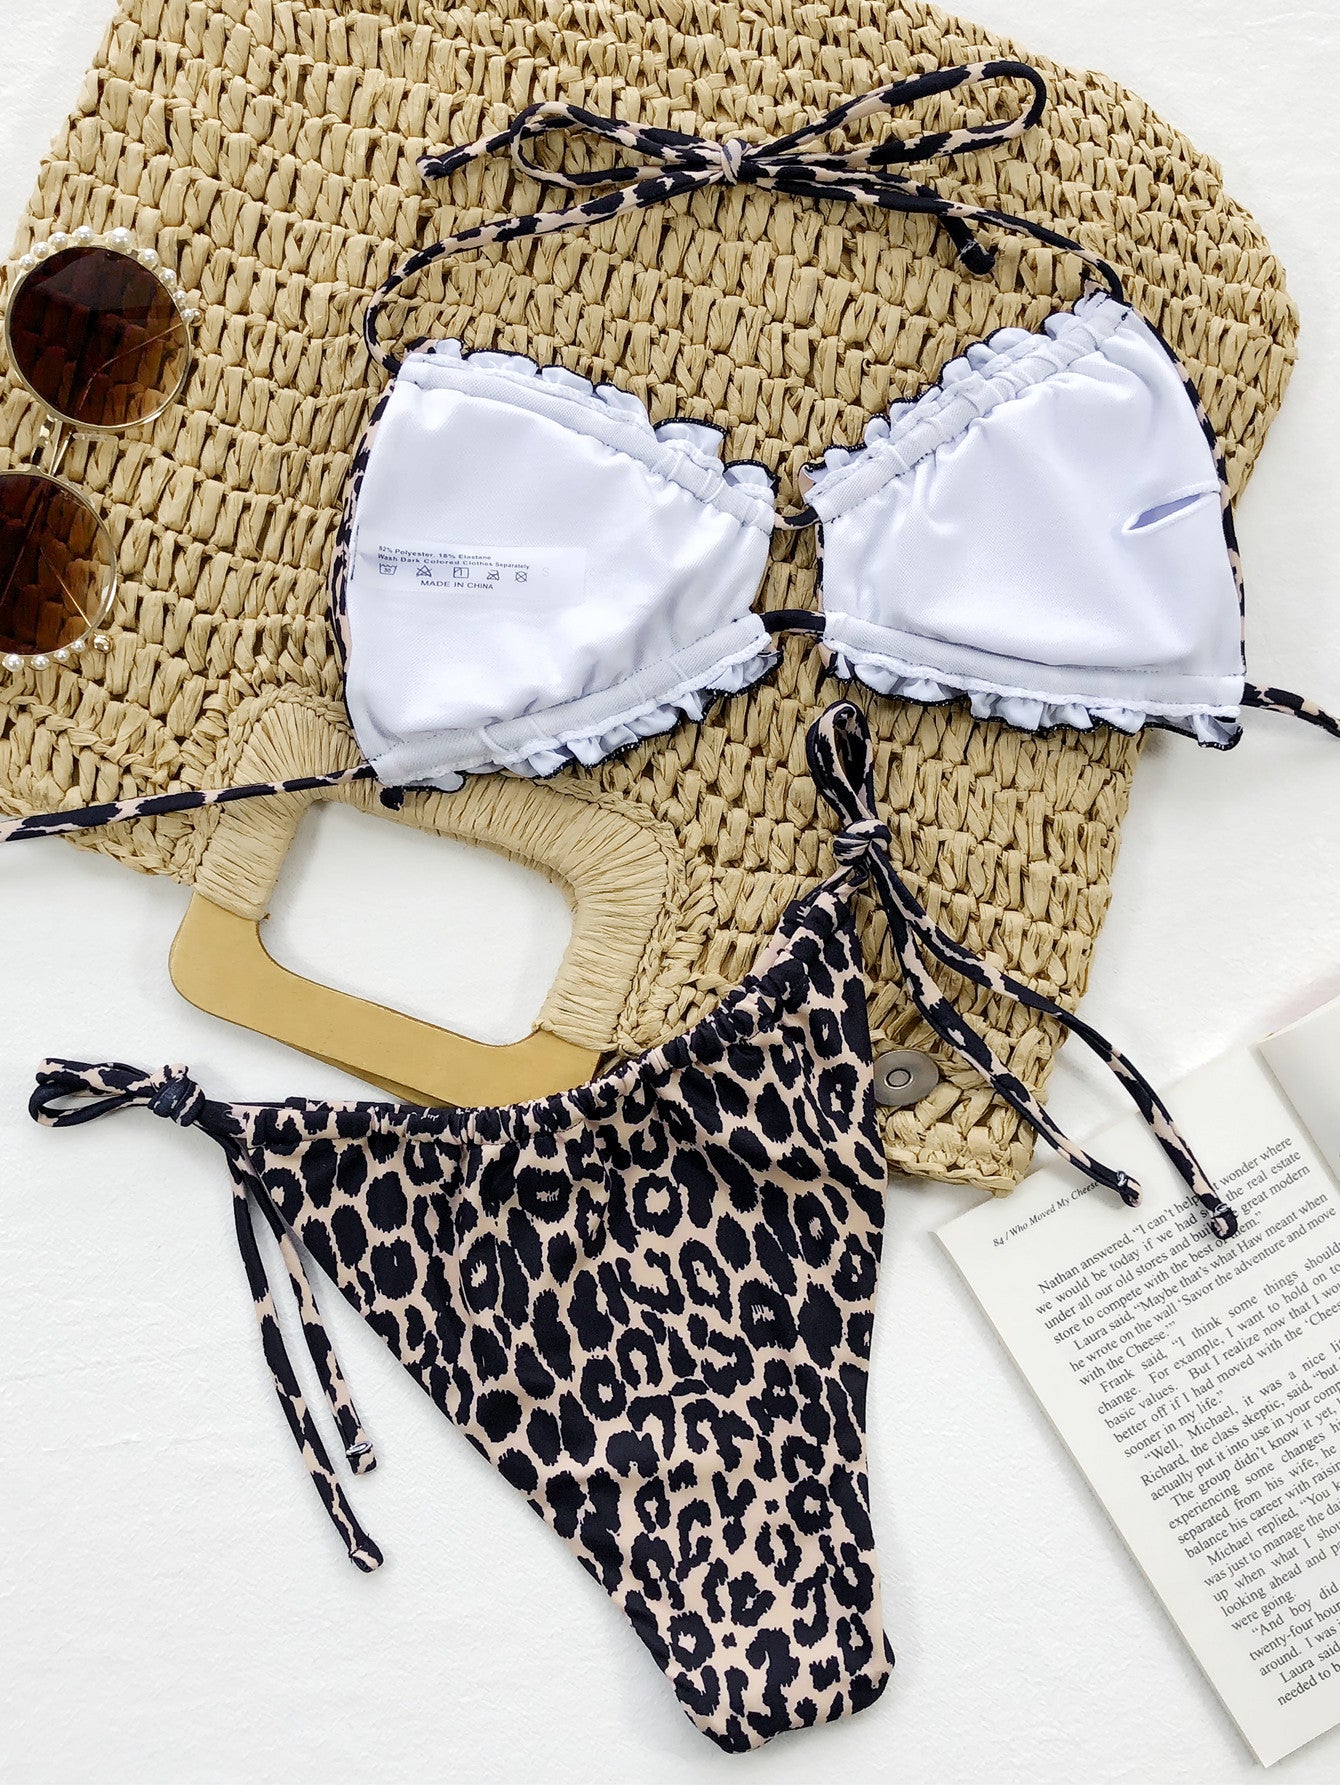 Frill Trill Halter Neck Bikini Set - Kawaii Stop - Beachwear, Bikini, Comfortable, Double.T, Fashion., Frill, Halter Neck, Leopard Print, Removable Padding, Ship From Overseas, Shipping Delay 09/29/2023 - 10/04/2023, Solid Color, Stylish, Swim, Swimsuits, Swimwear, Tie Side, Two Piece Swimsuits, Women's Clothing